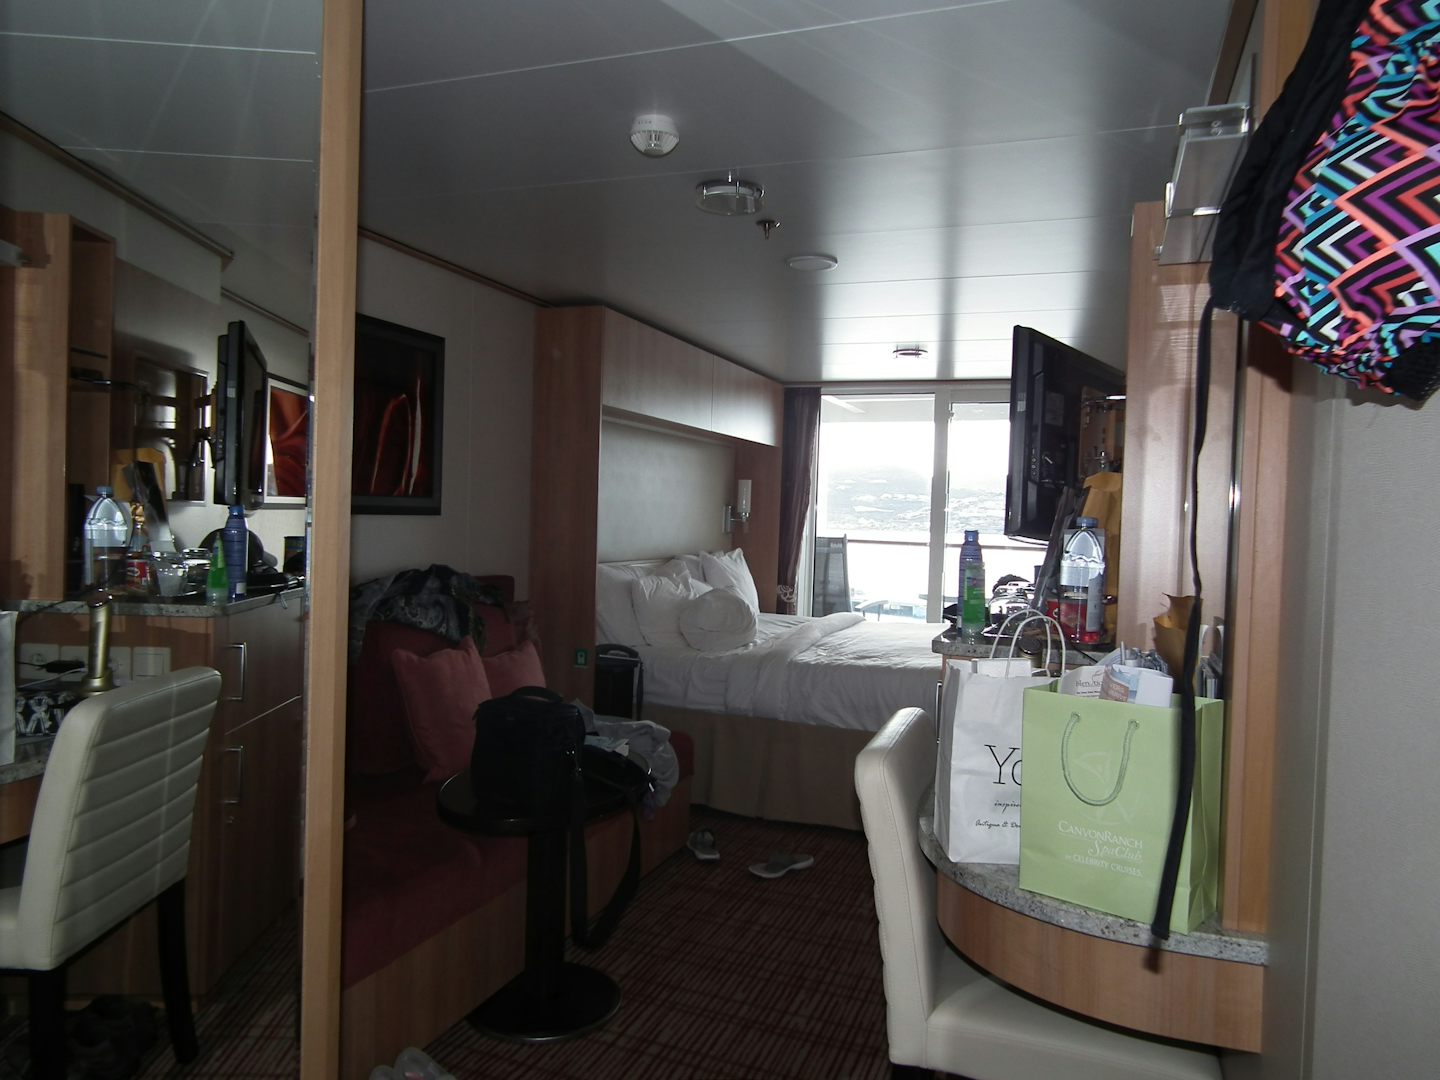 Our Cabin 6103